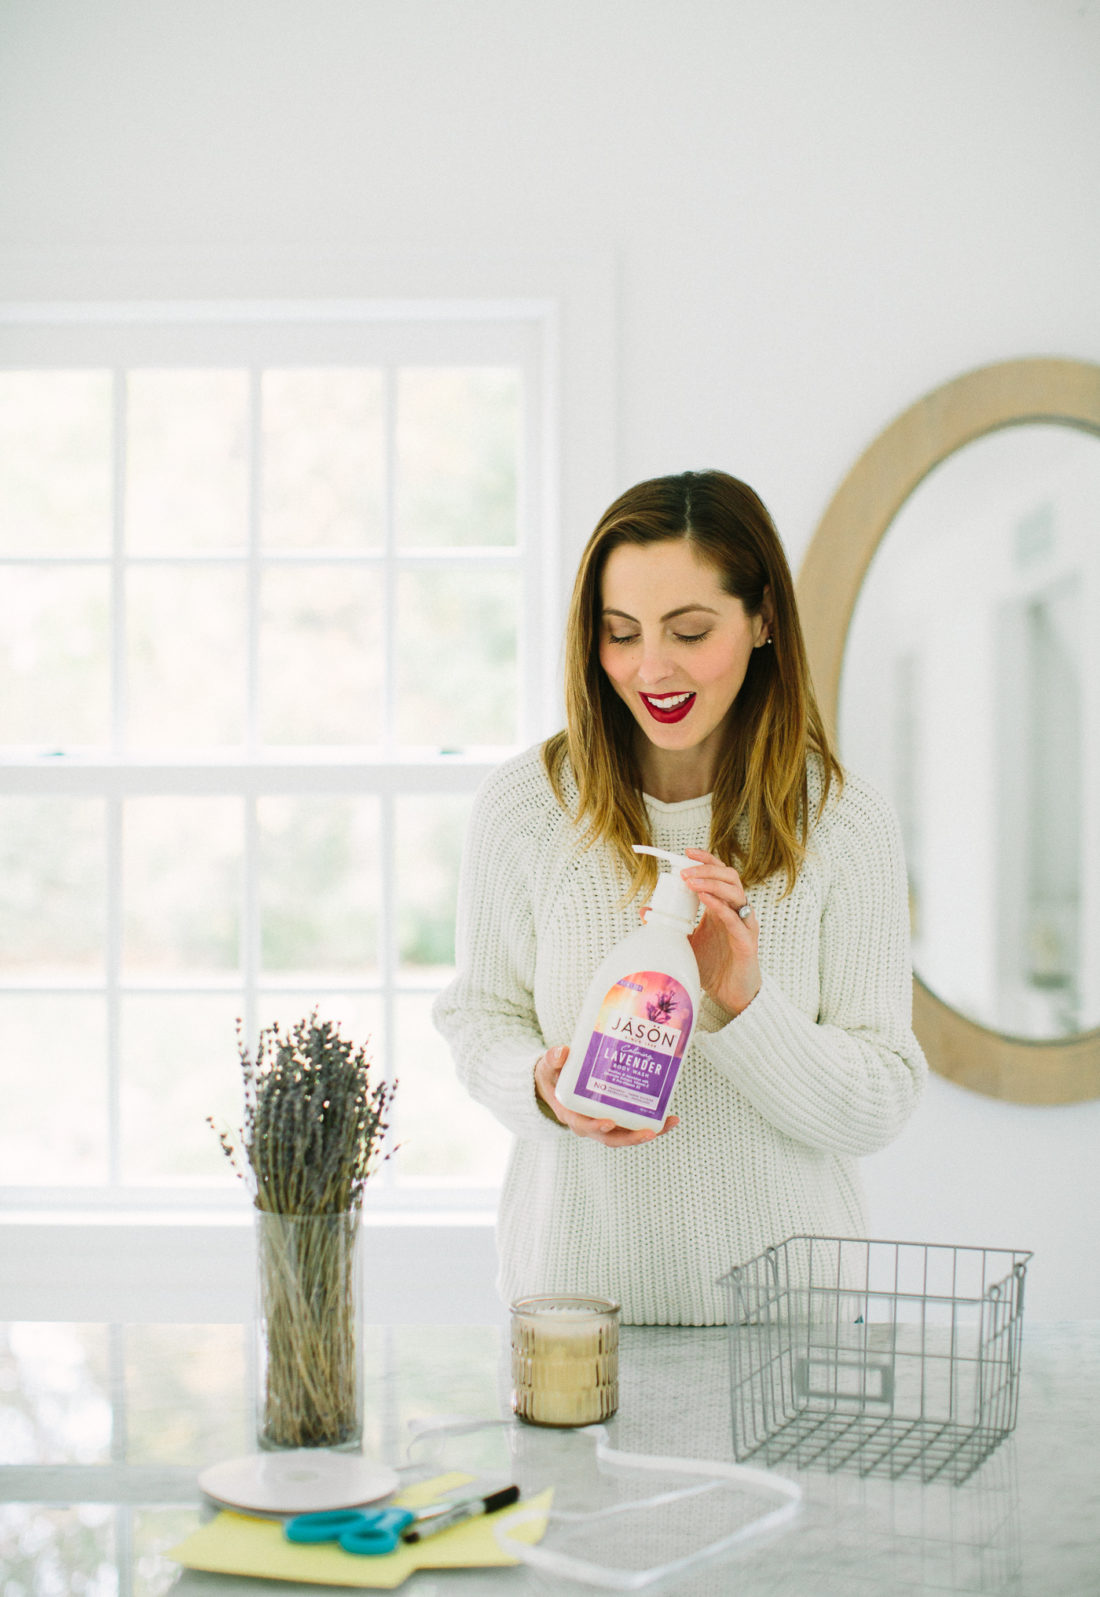 Eva Amurri Martino puts together a thoughtful welcome basket of lavender goodies for her holiday houseguests